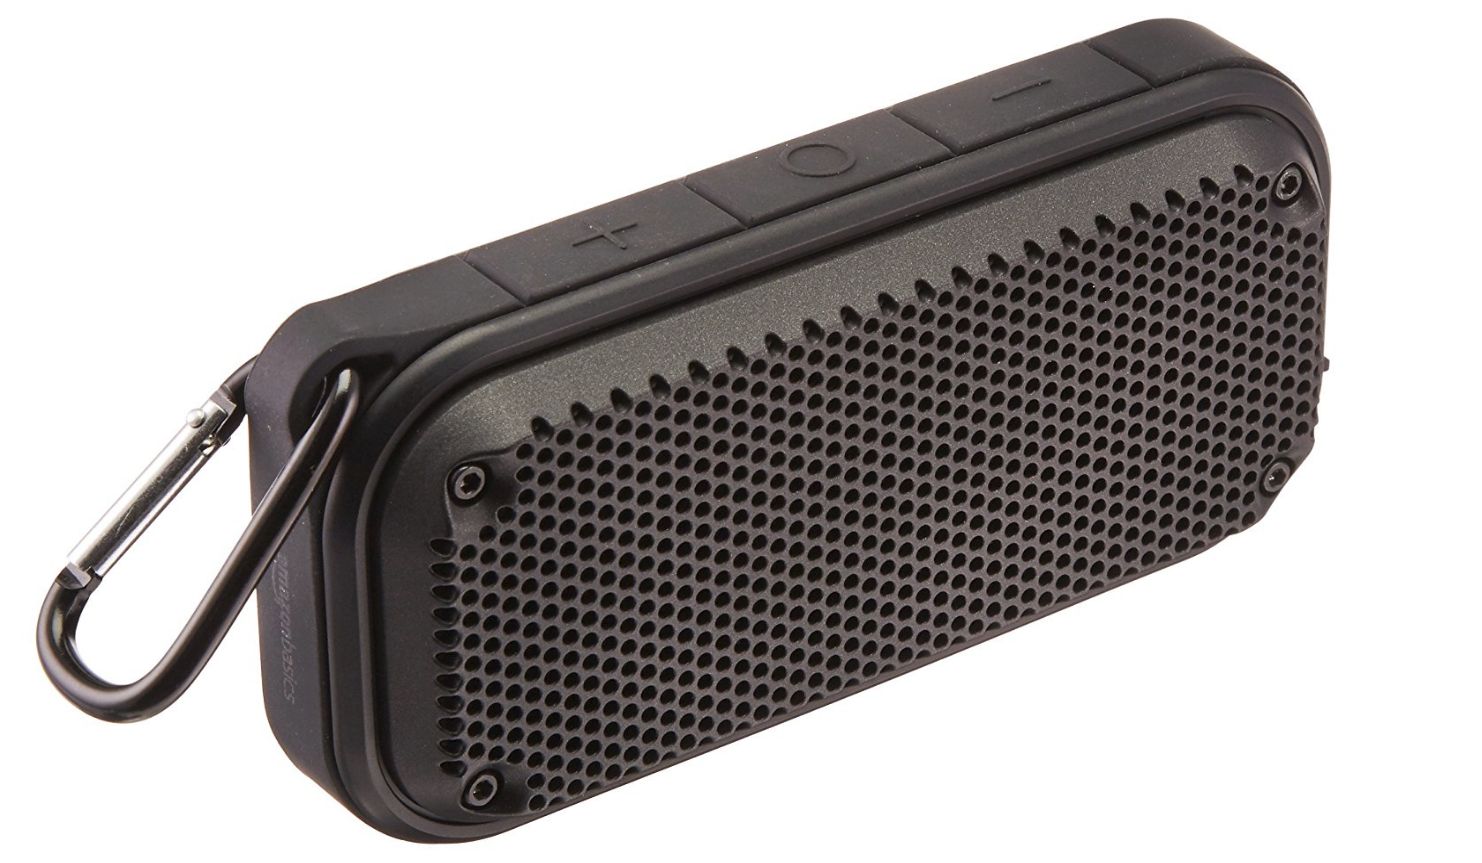 Gift ideas for coworkers - AmazonBasics Shockproof and Waterproof Bluetooth Wireless Speaker